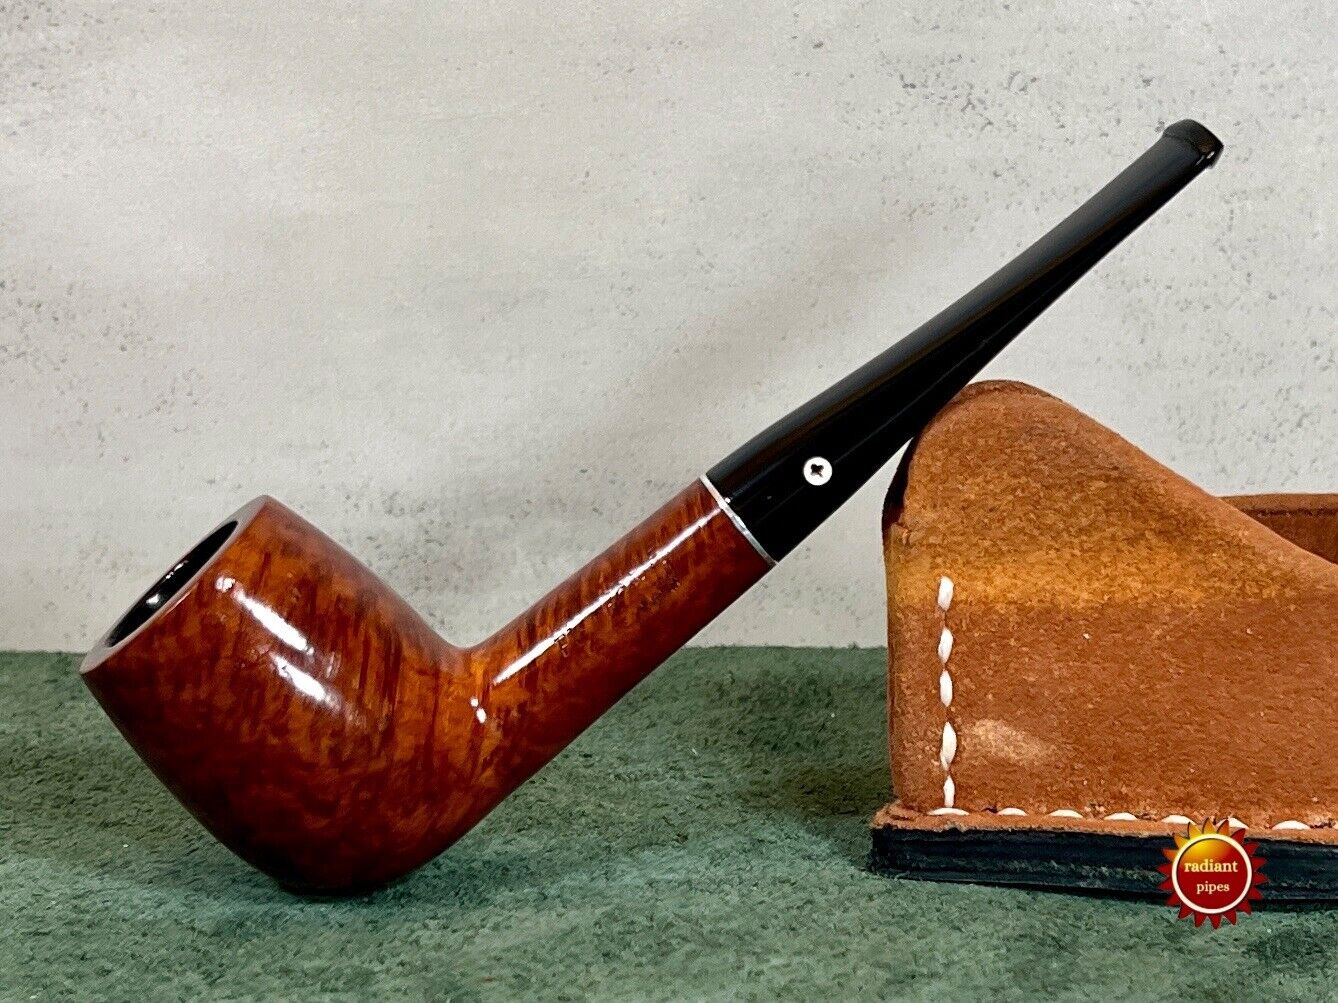 Kaywoodie Flame Grain Billiard Vintage Pipe 1953-72, Excellent Condition, CLEAN